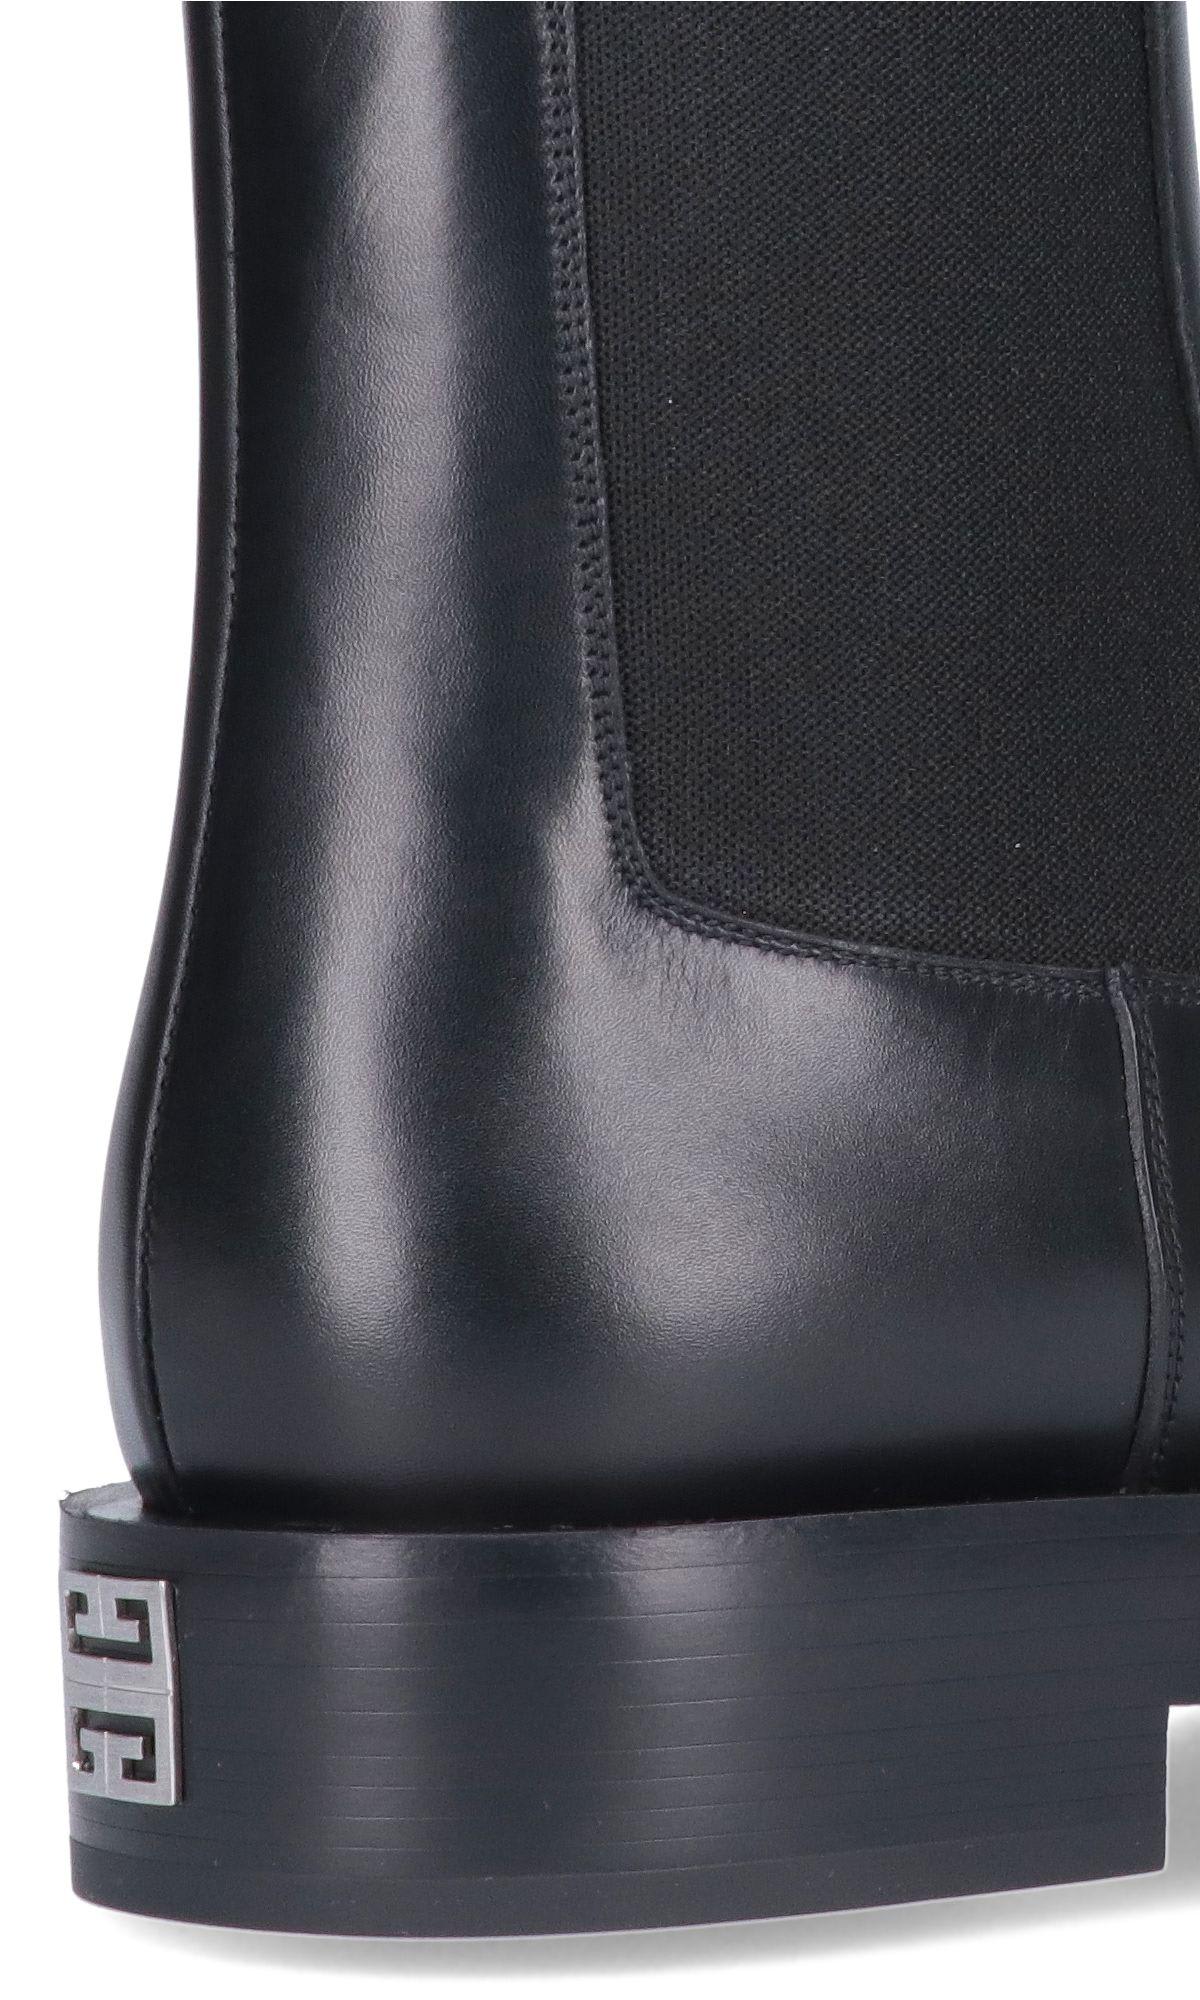 Shop Givenchy Squared Chelsea Boots In Black